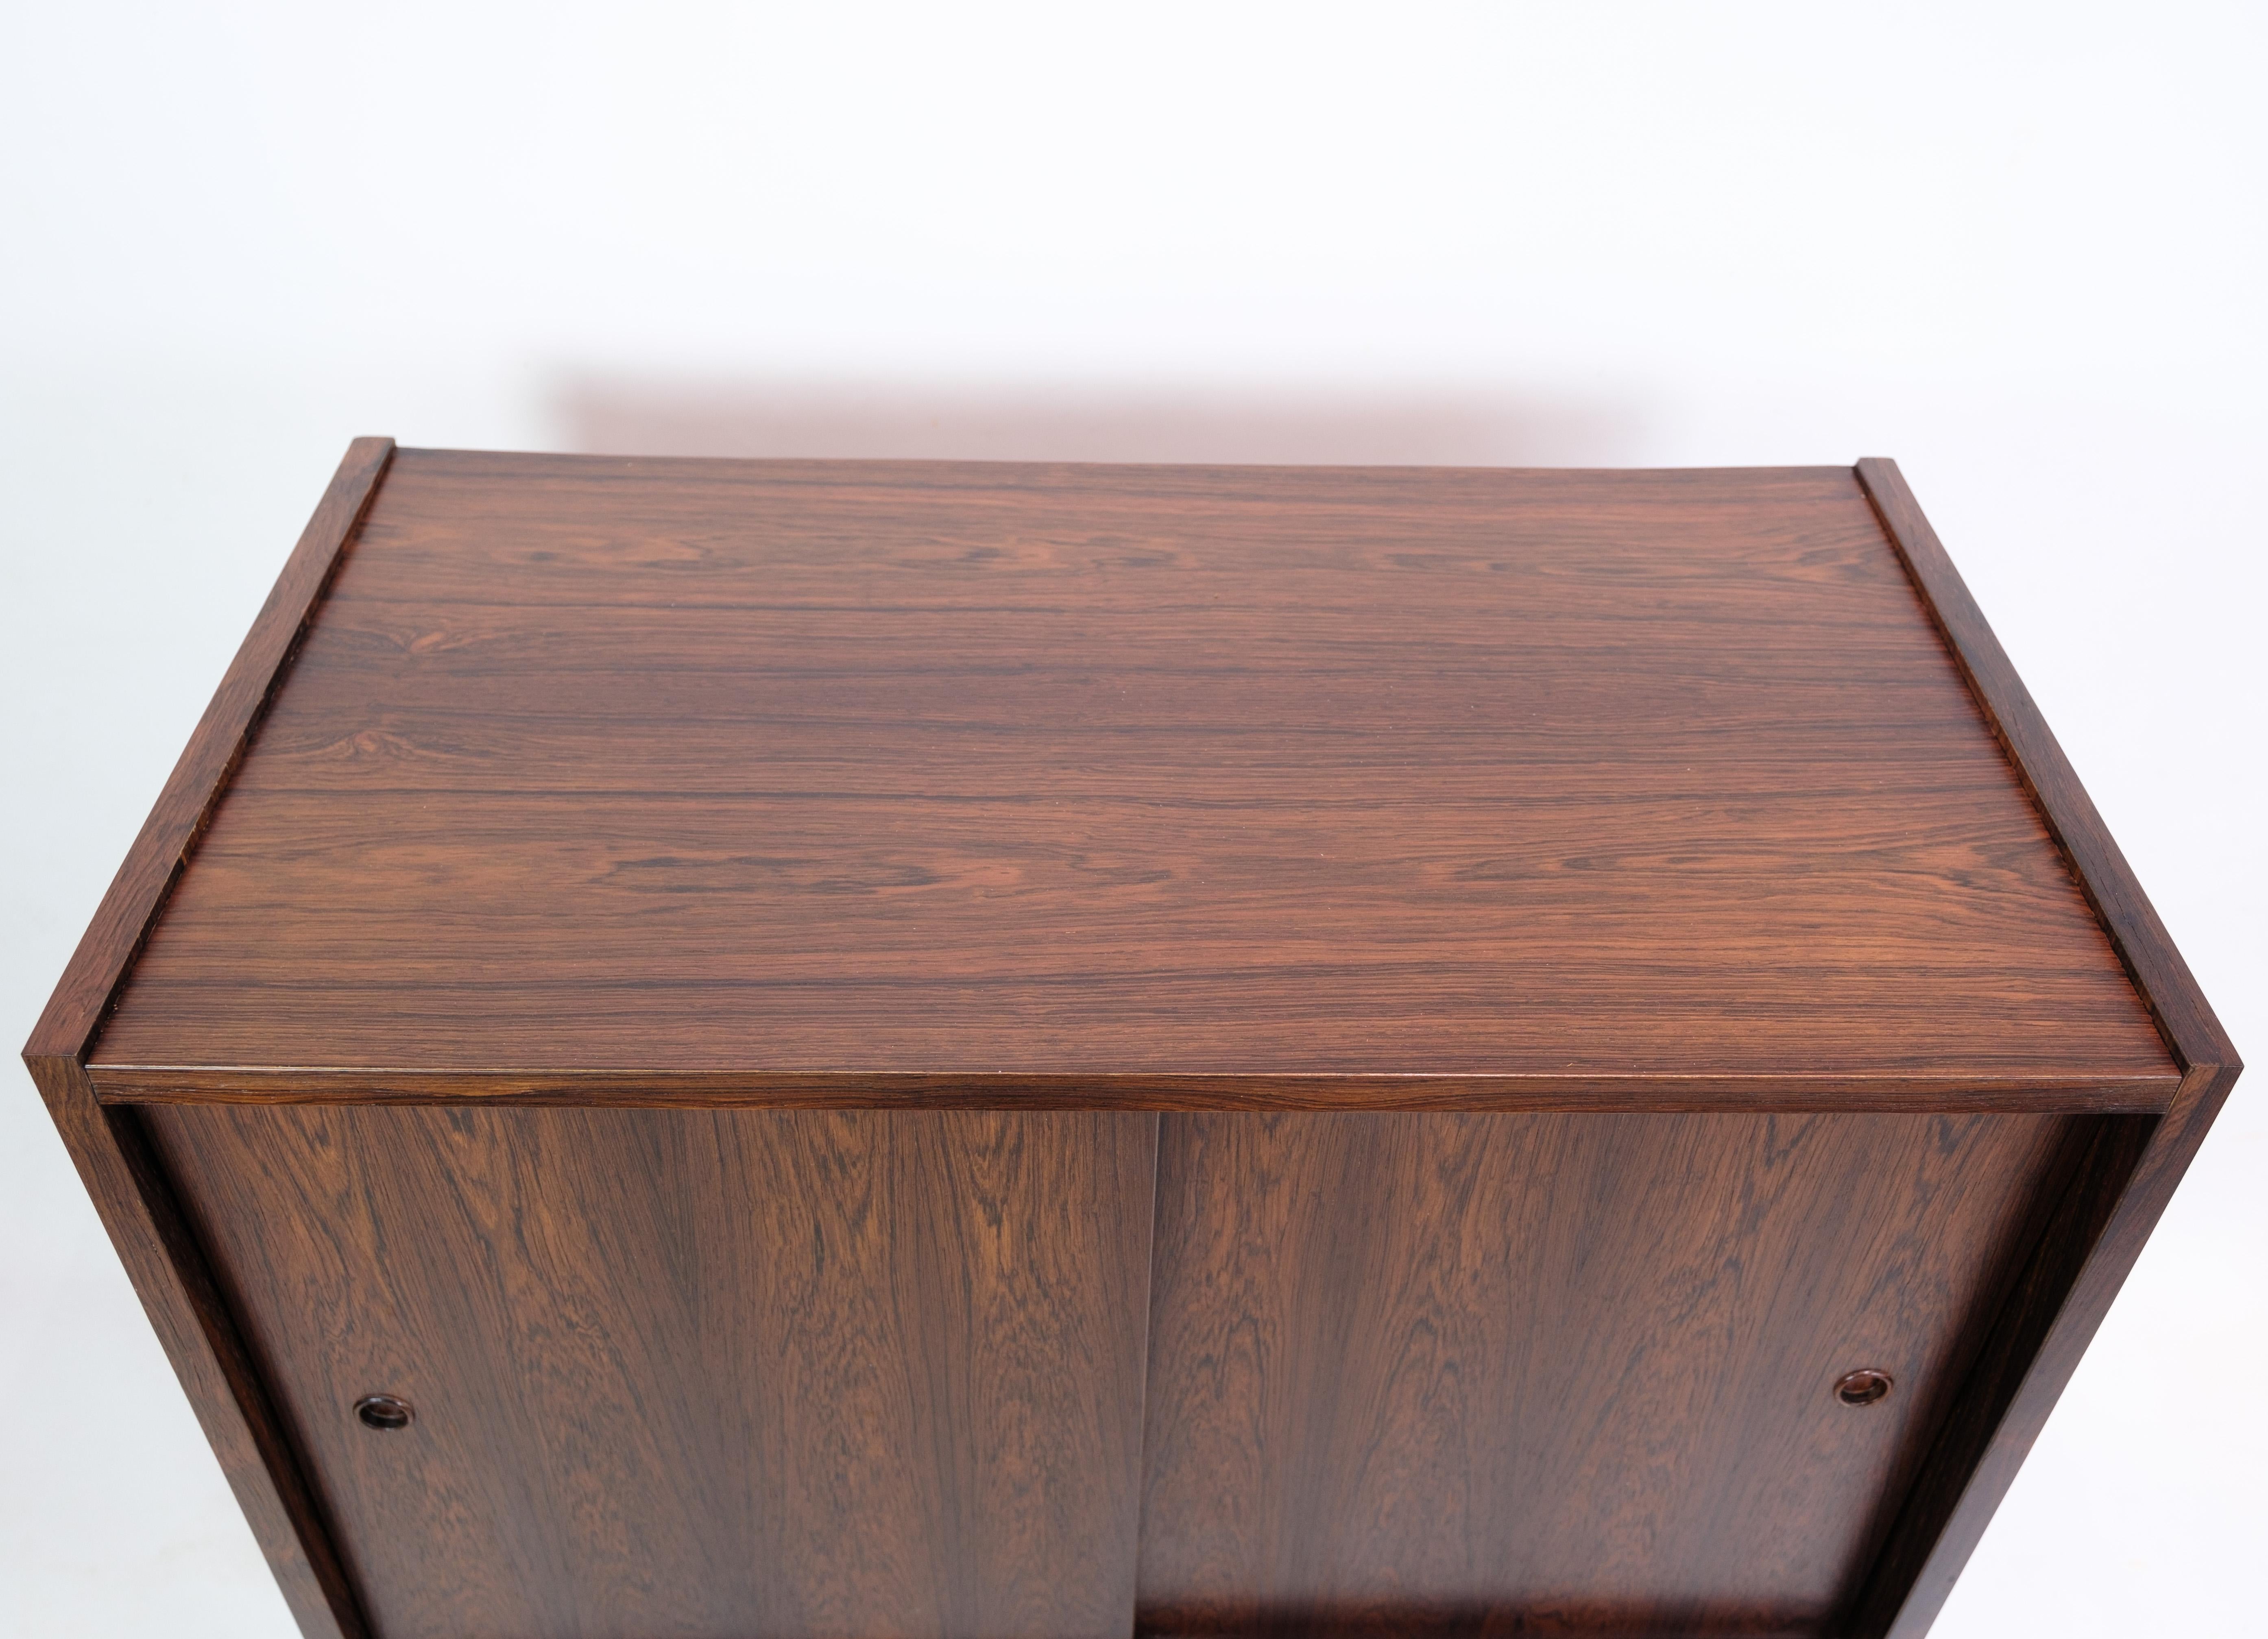 Sideboard With Shelves Made In Rosewood, Danish Design From 1960s In Good Condition For Sale In Lejre, DK